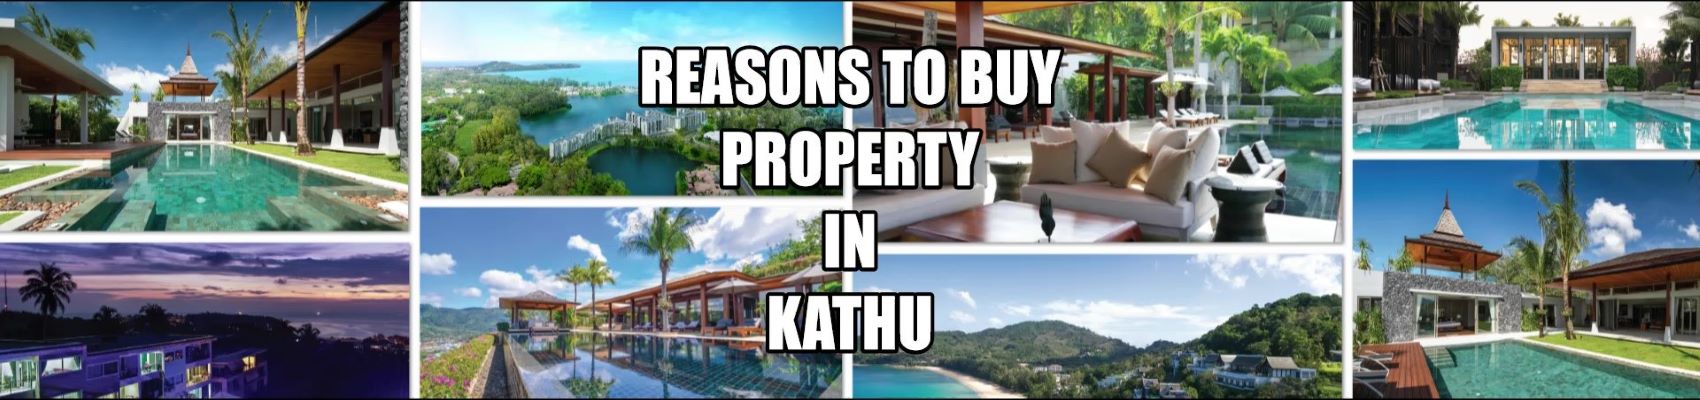 Top reasons to buy property in Kathu